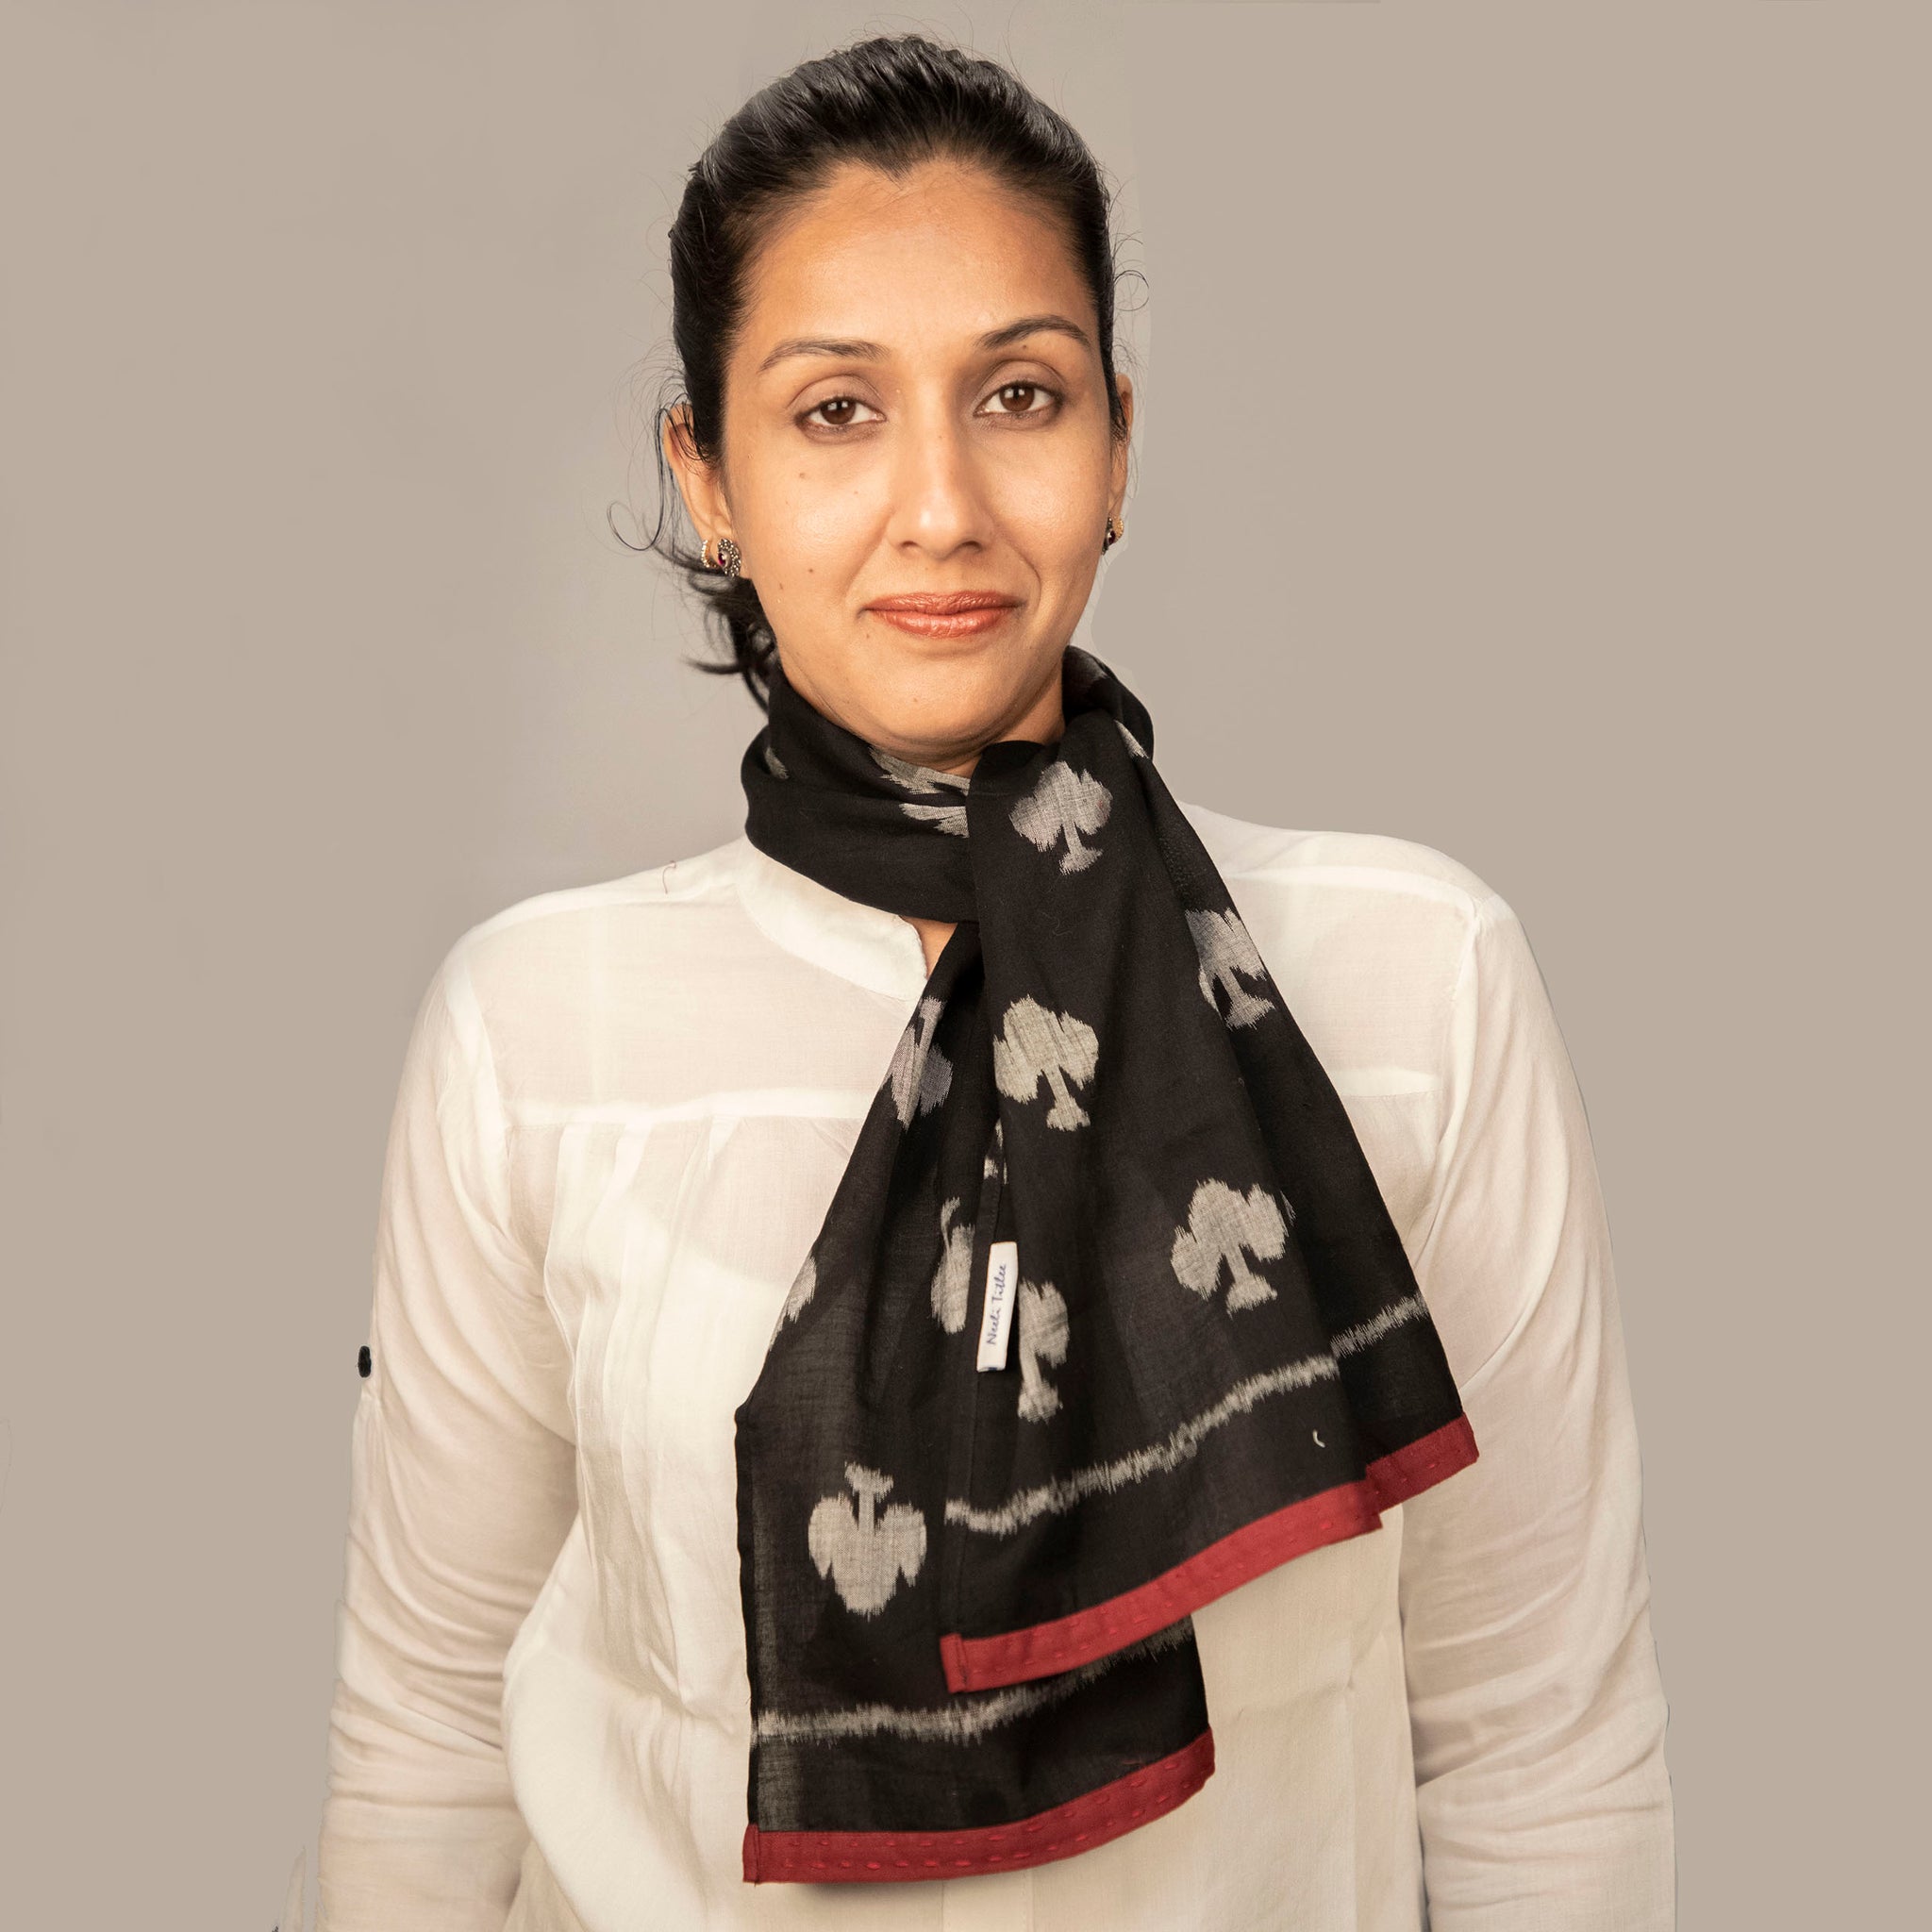 Sambalpuri cotton ikat taash clubs skinny scarf with maroon end piping and kantha stitch